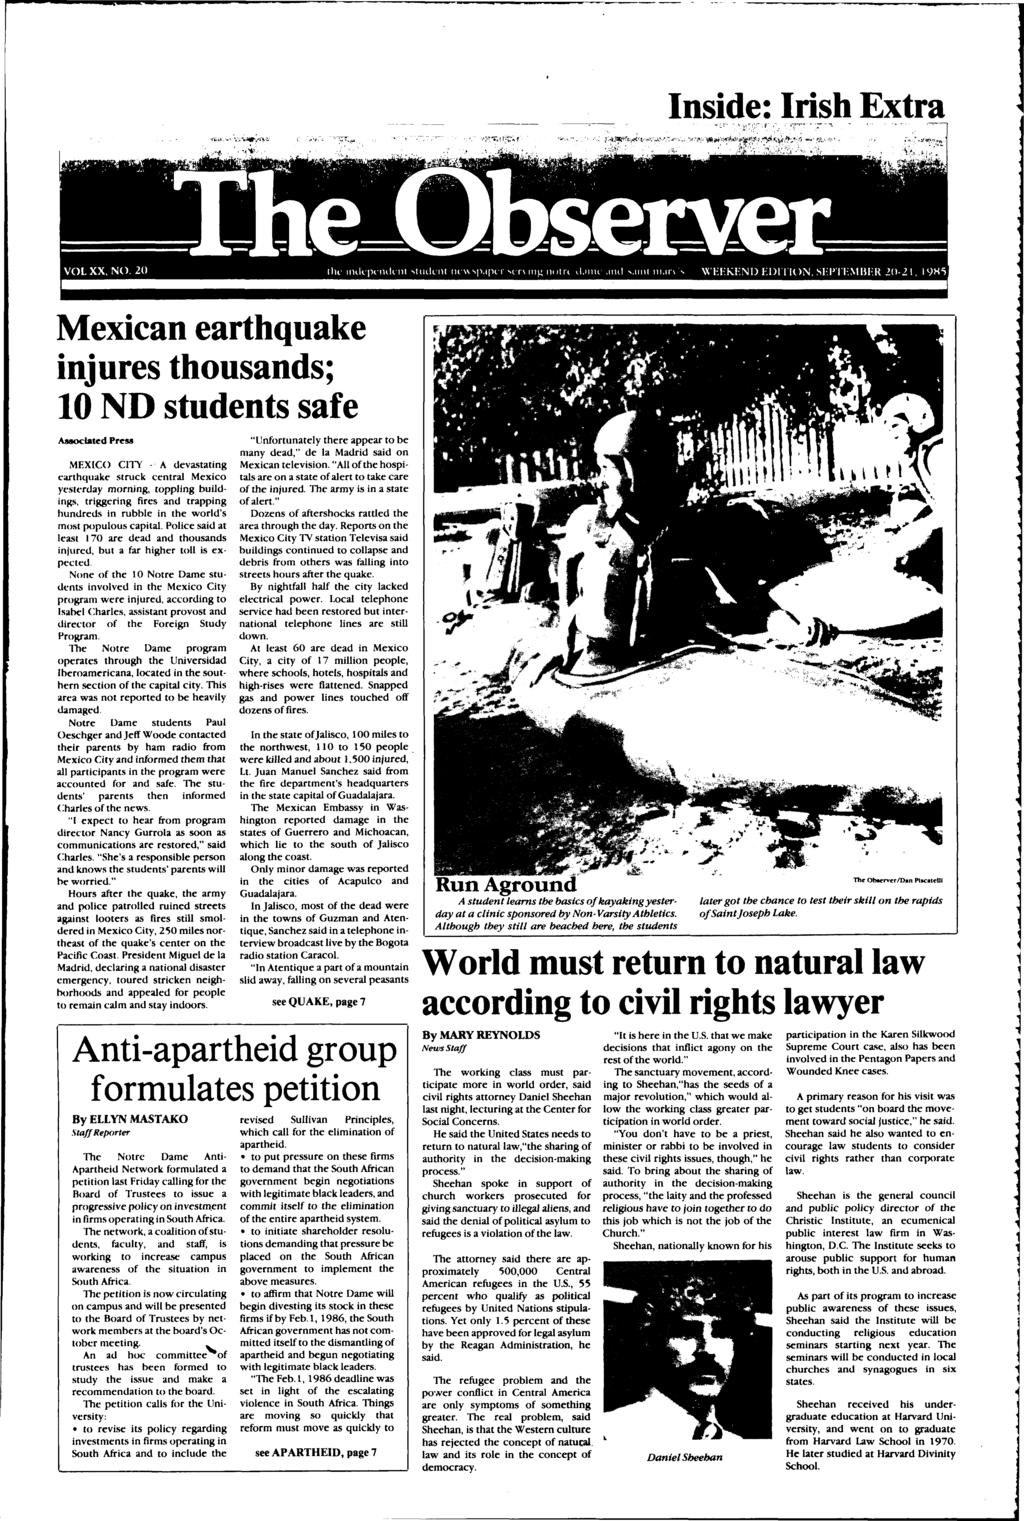 ----------------------------------------------------------------------- - nside: ish Exta Mexican eathquake injues thousands; 10 ND students safe AMoclated Pess MEXCO CTY - A devastating eathquake